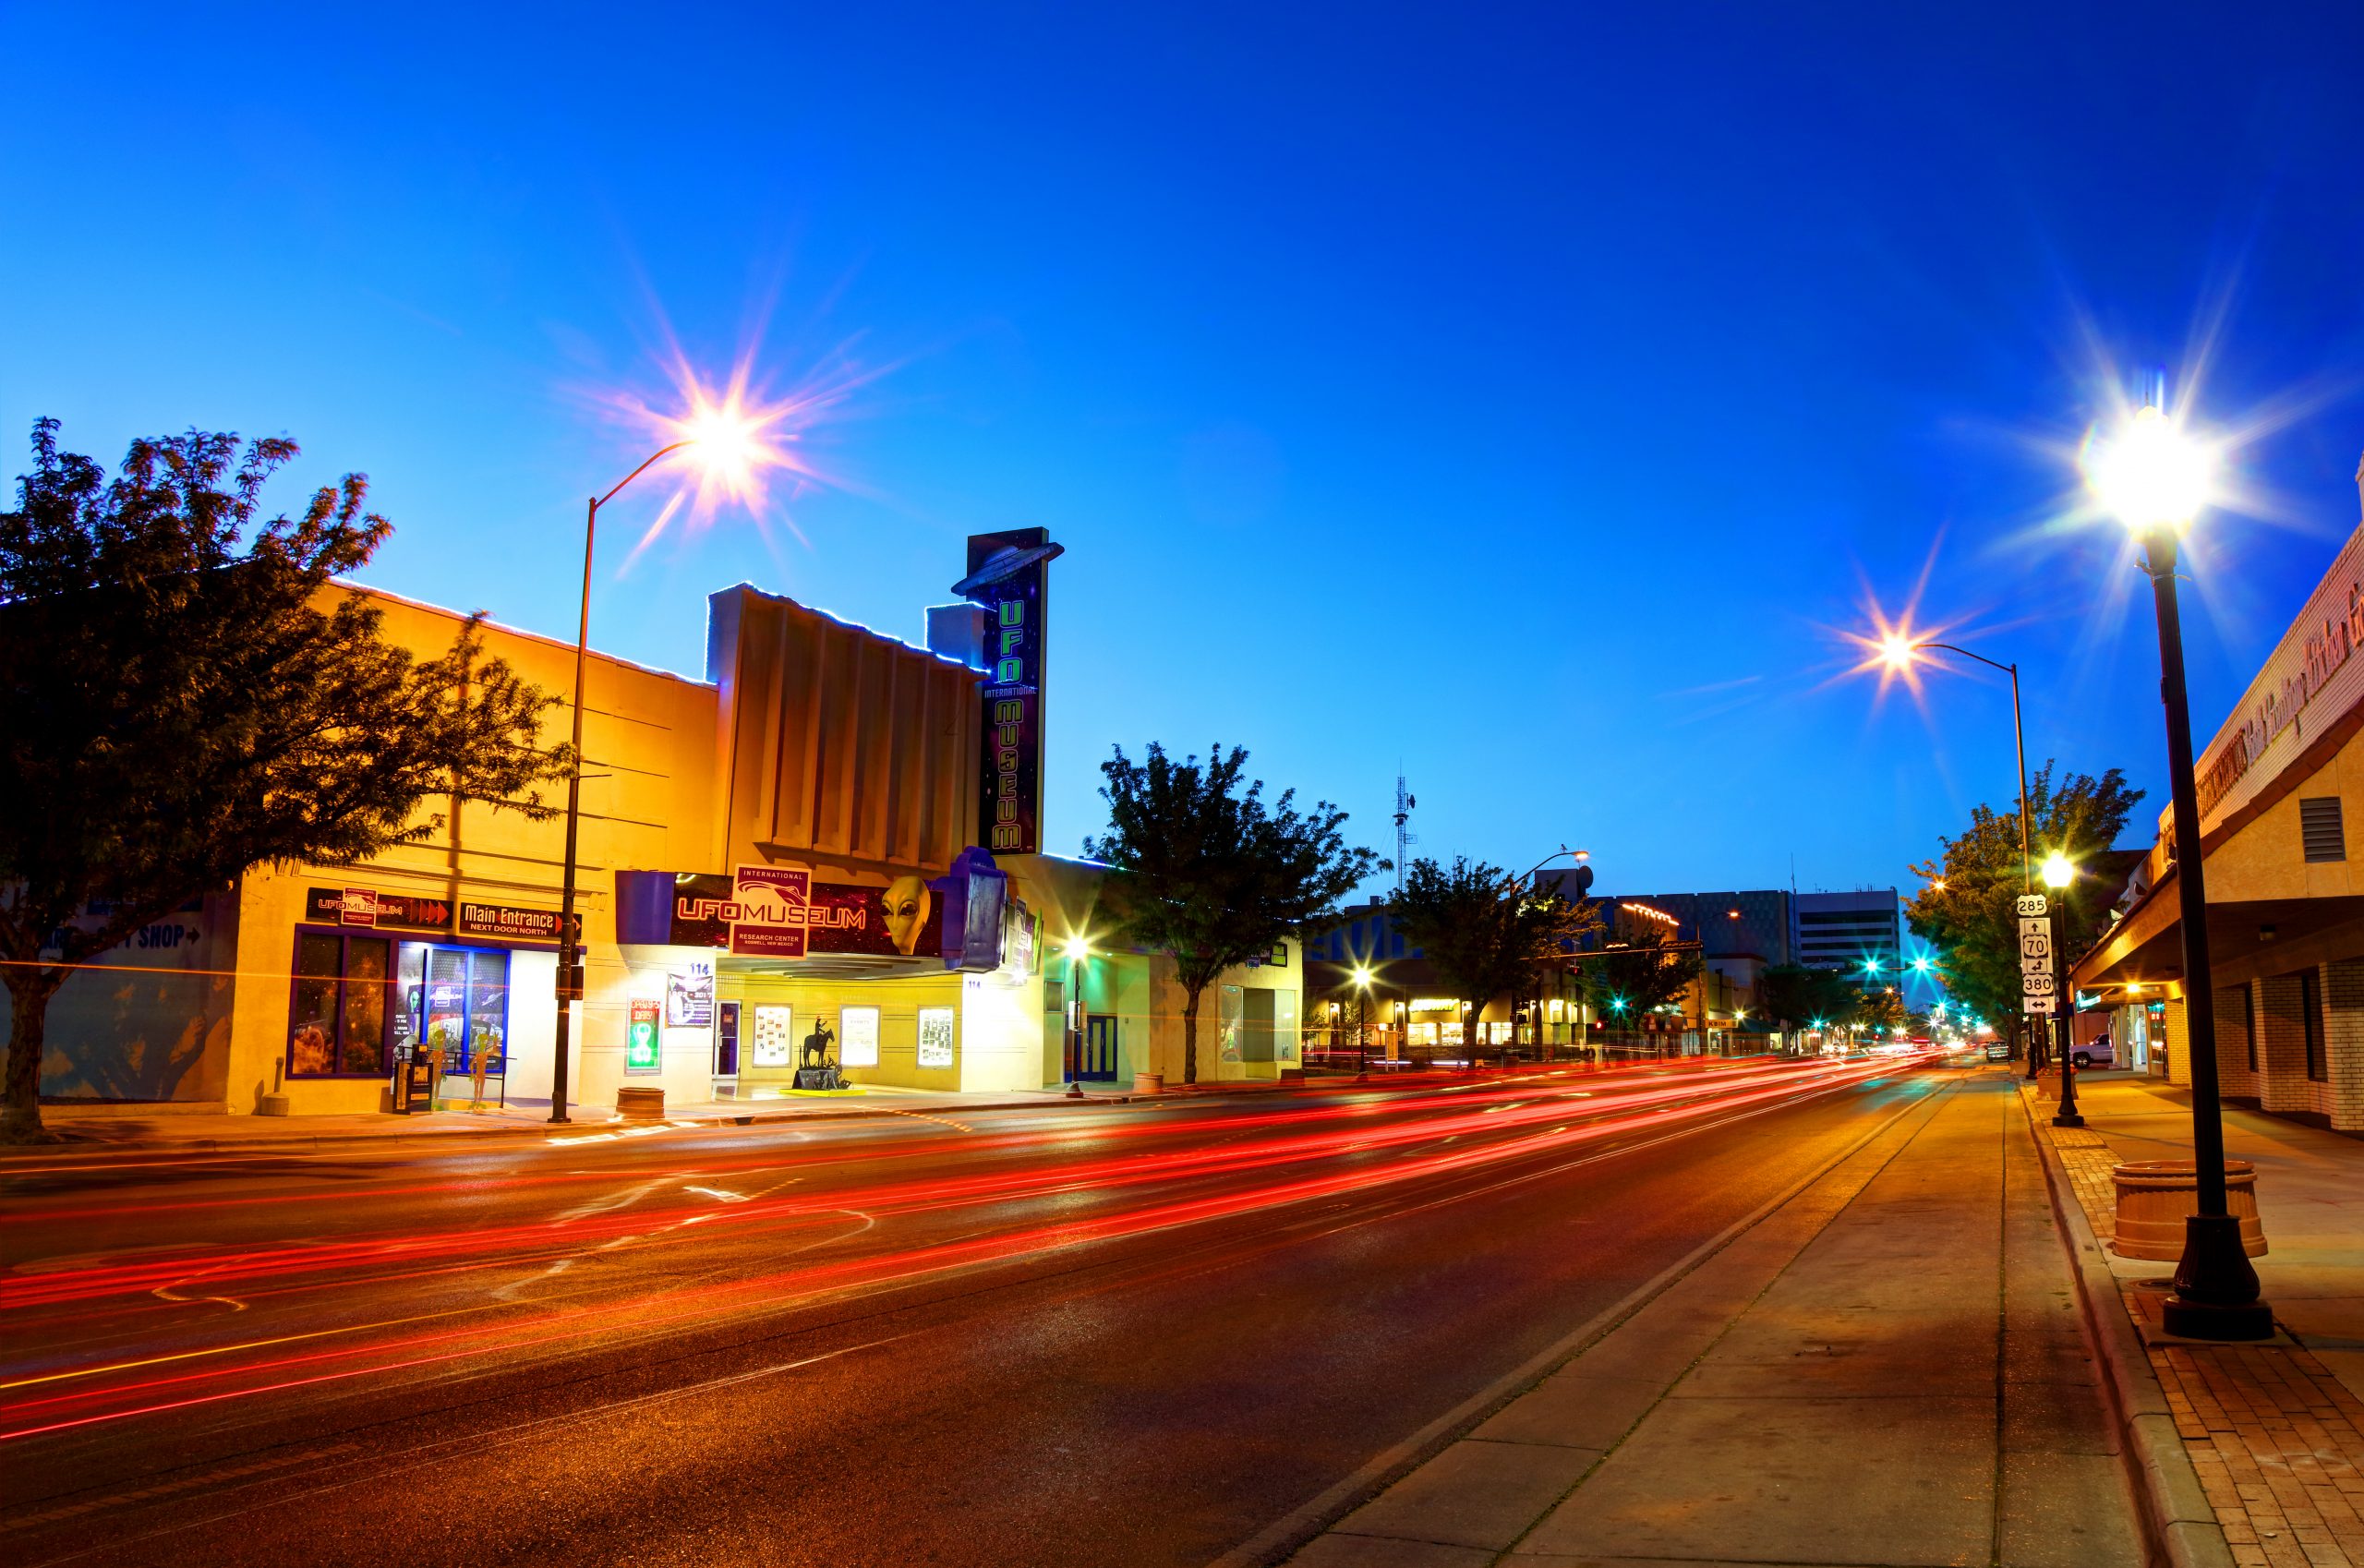 Downtown Roswell, NM